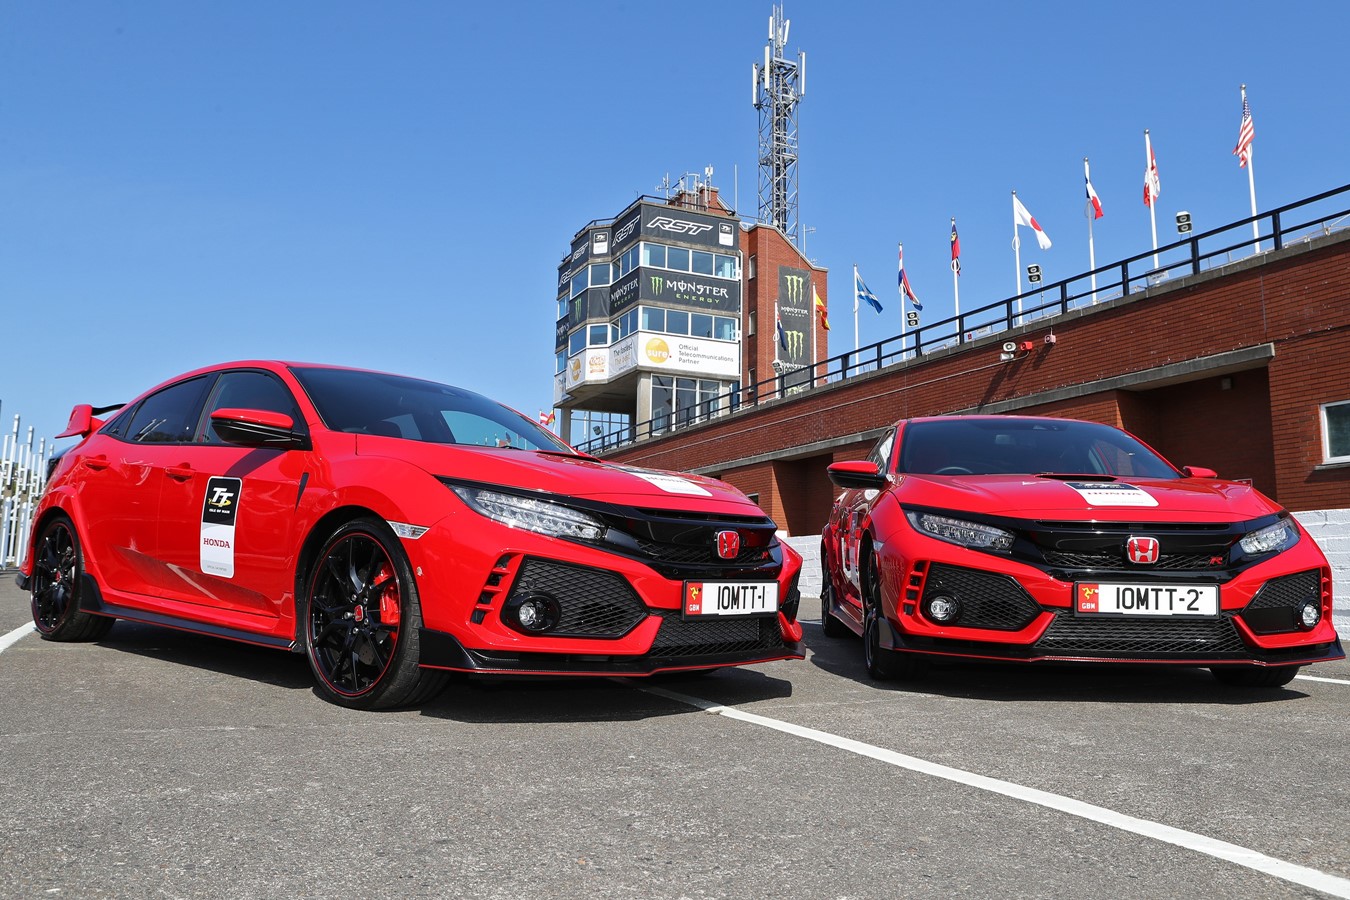 Honda UK to provide Official Cars and Motorcycles for Isle of Man TT 